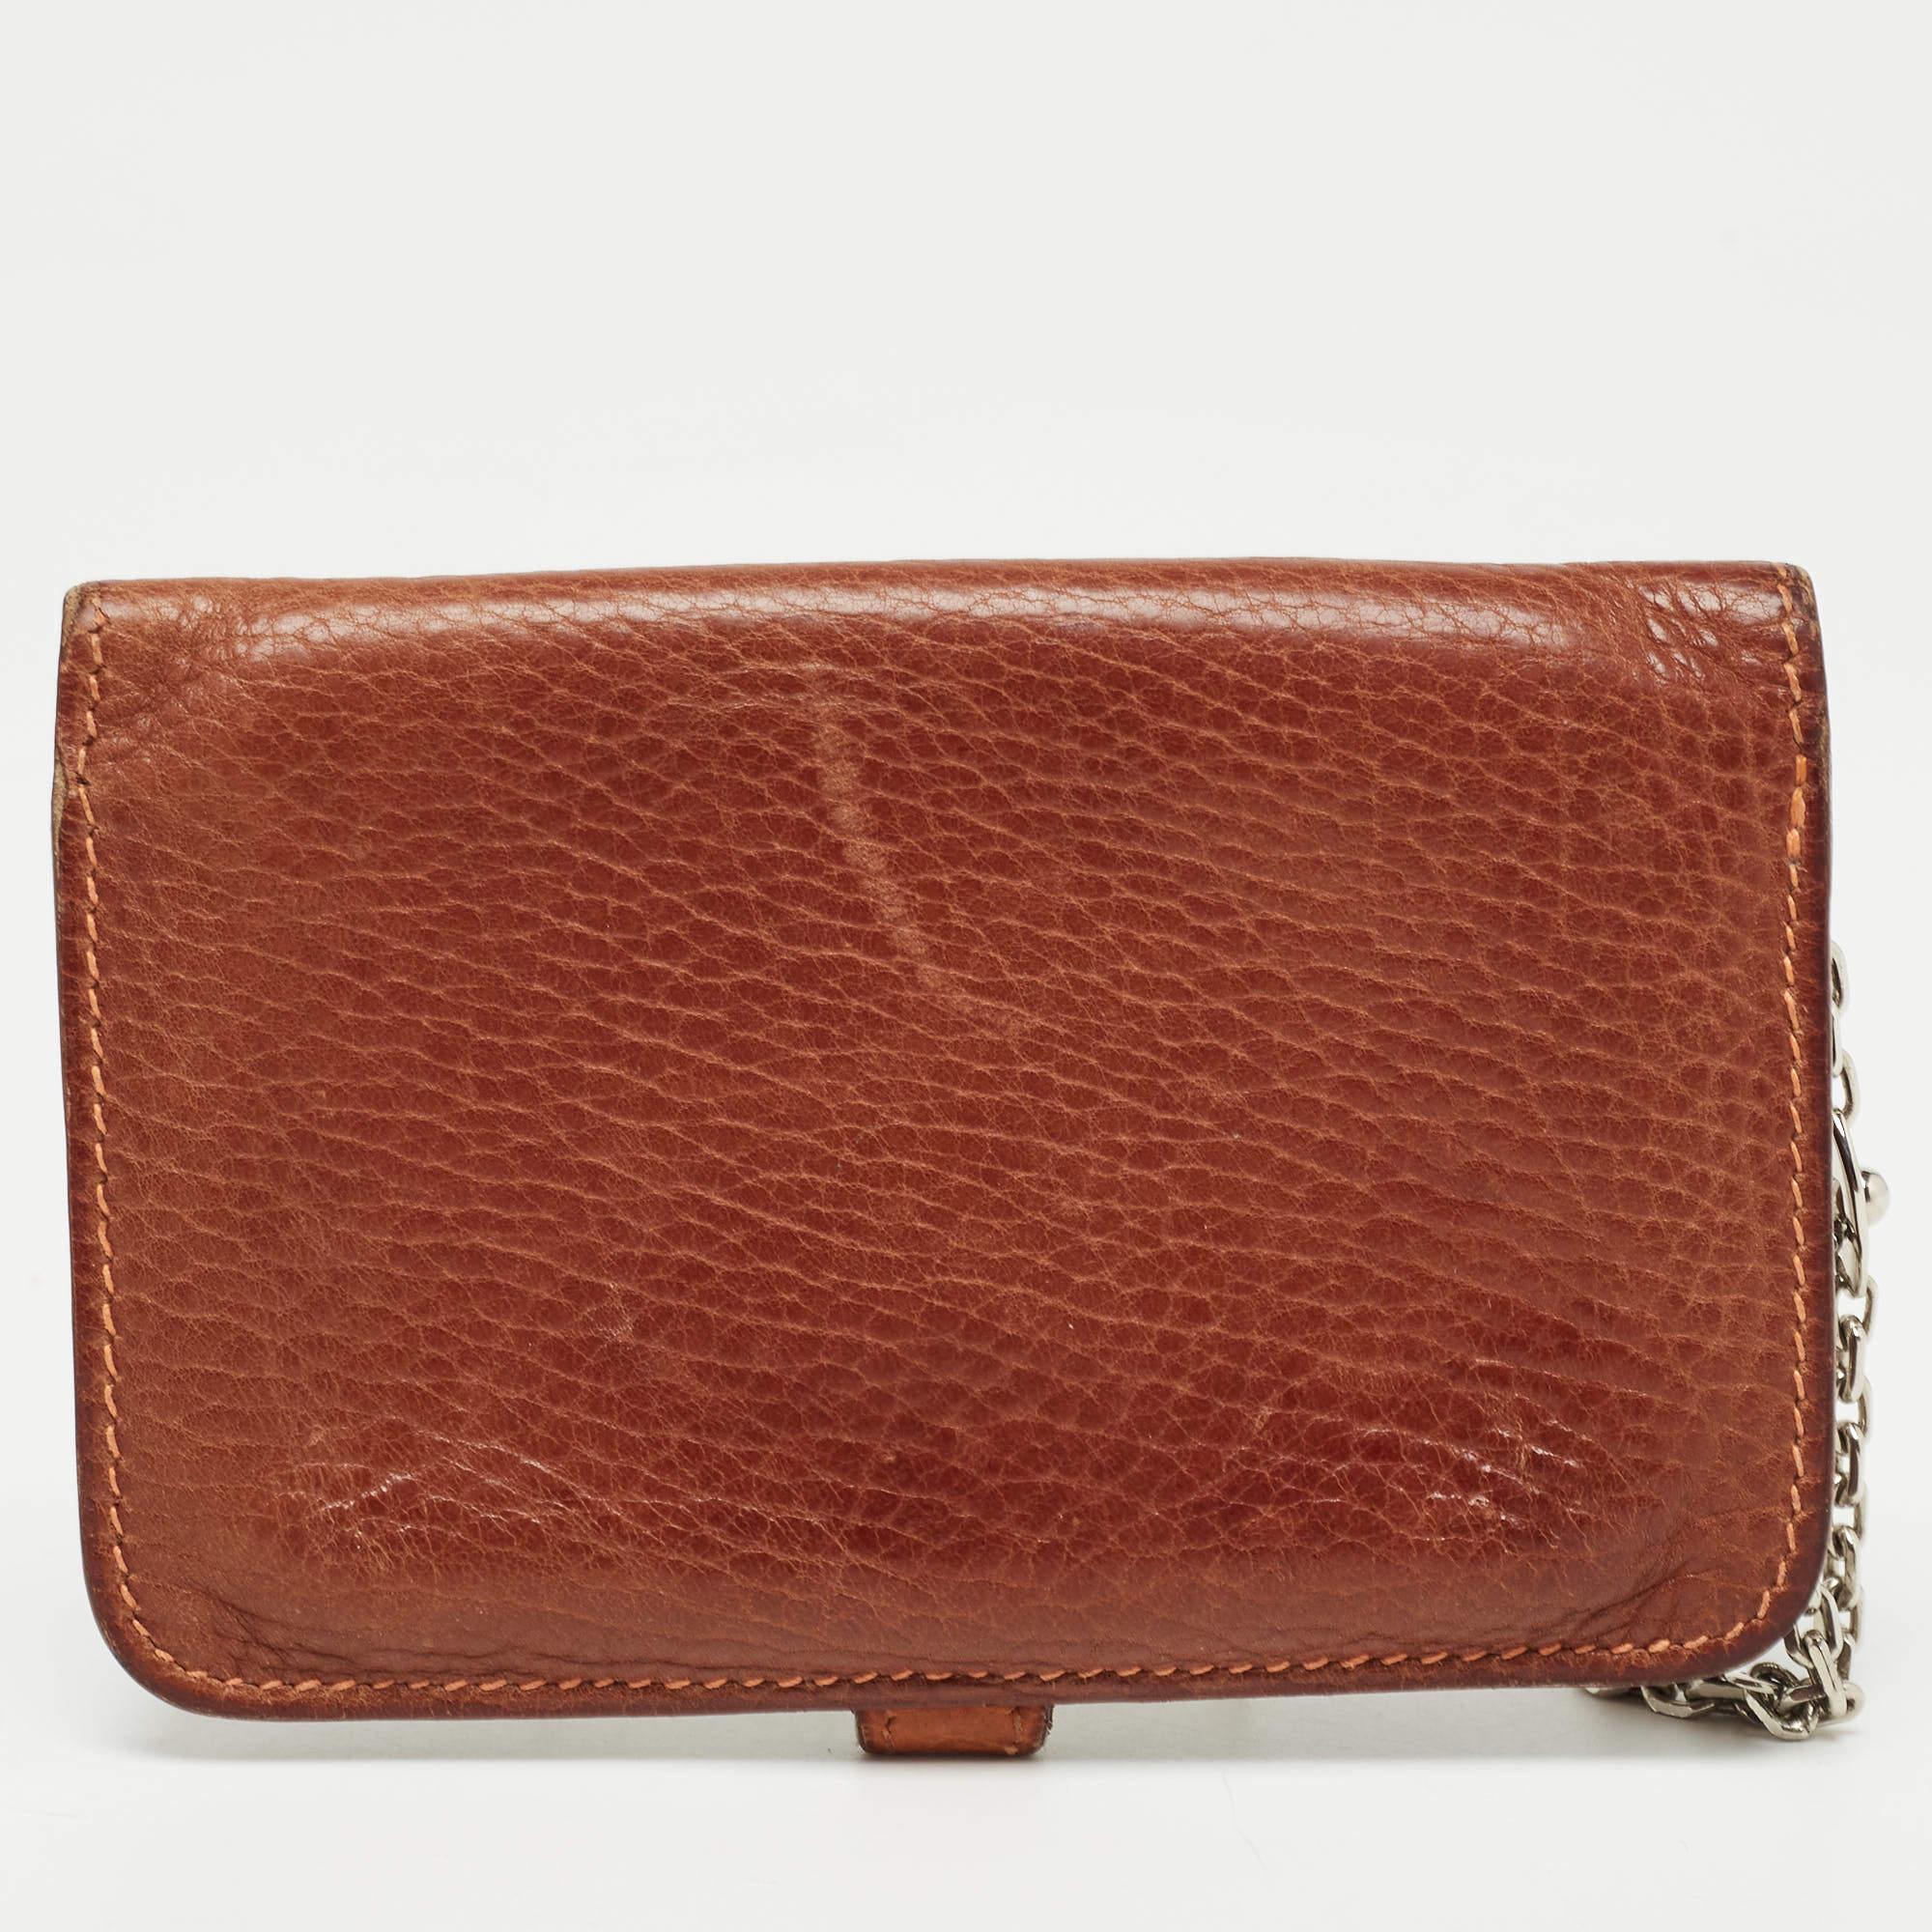 This Hermes Dogon card holder delivers on the brand's luxe aesthetic. Crafted from quality leather, it has a short metal chain and a classy lock.

